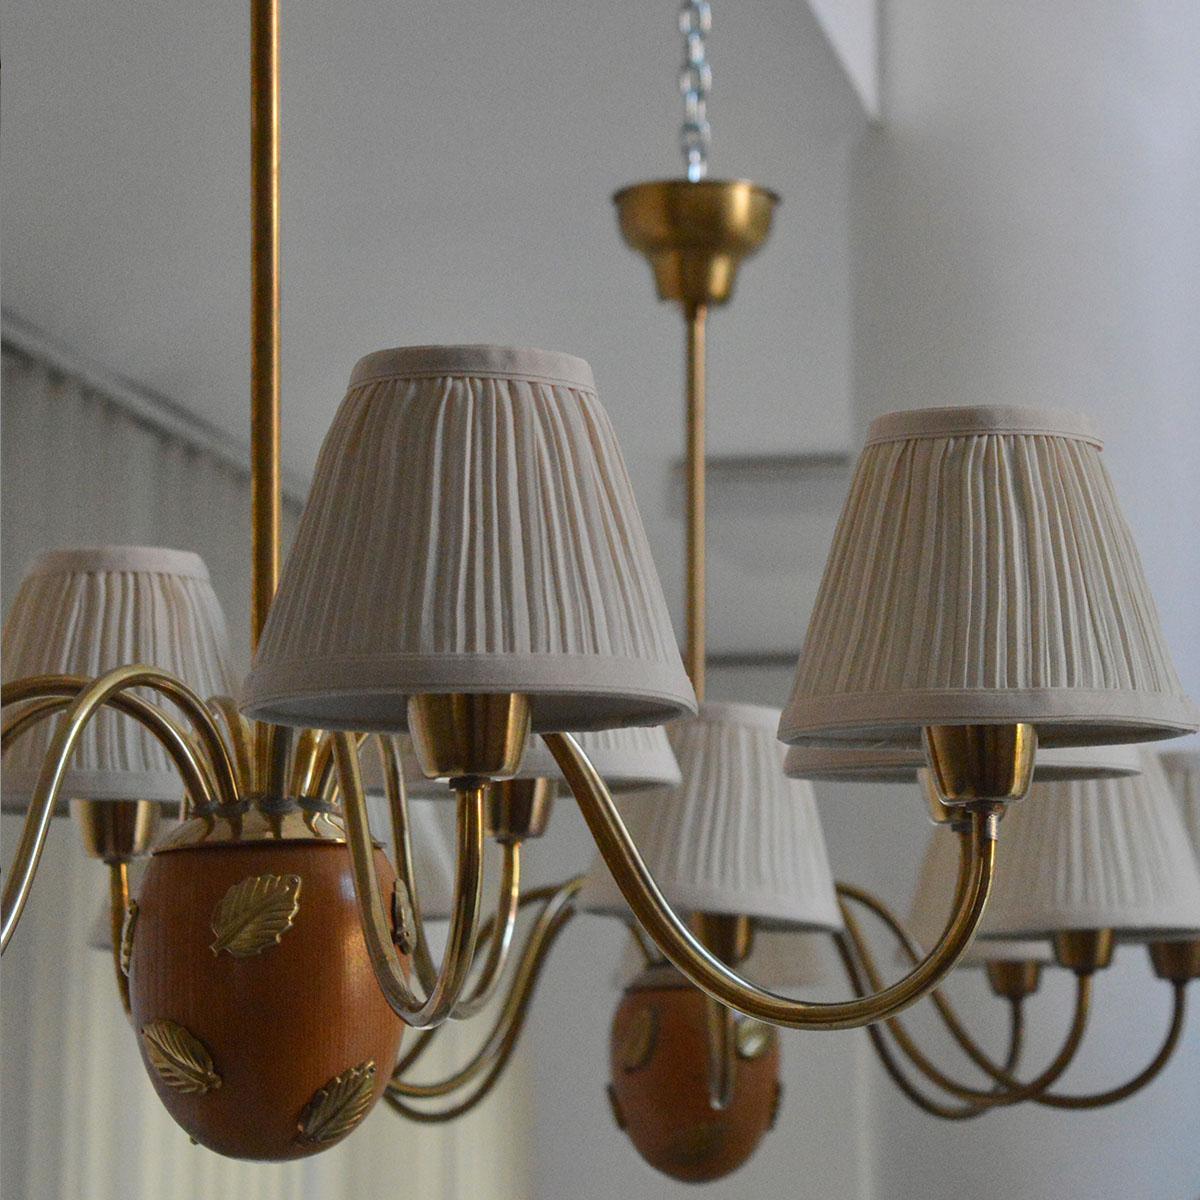 Swedish Hans Bergström Pair of Brass and Wood 8-Arm Chandeliers, 1940s For Sale